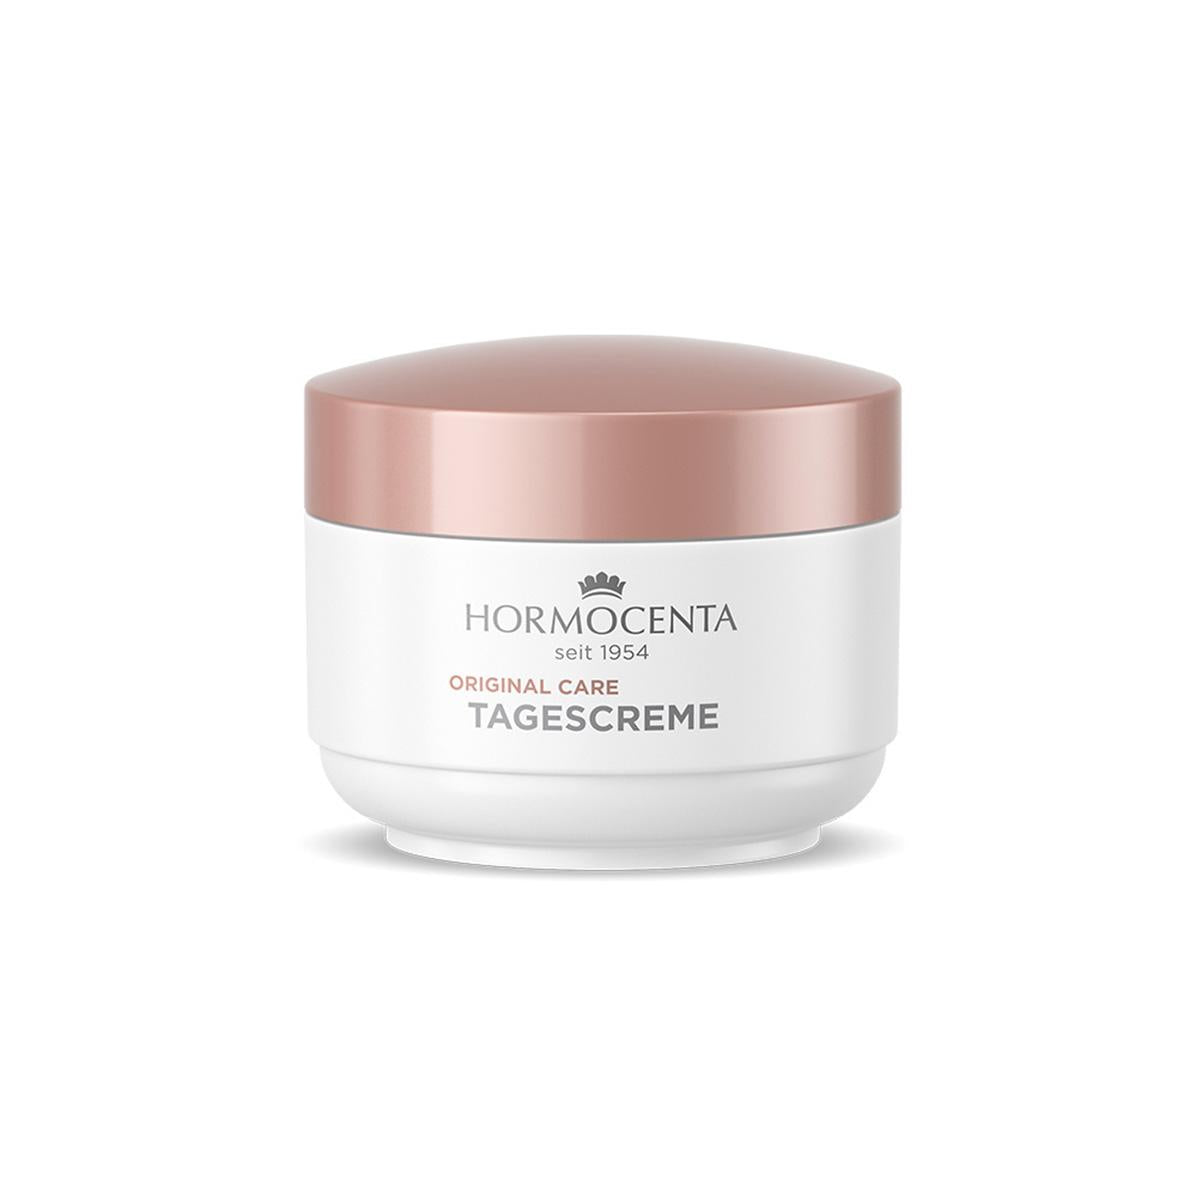 Primary image of Tagescreme (Day Cream)